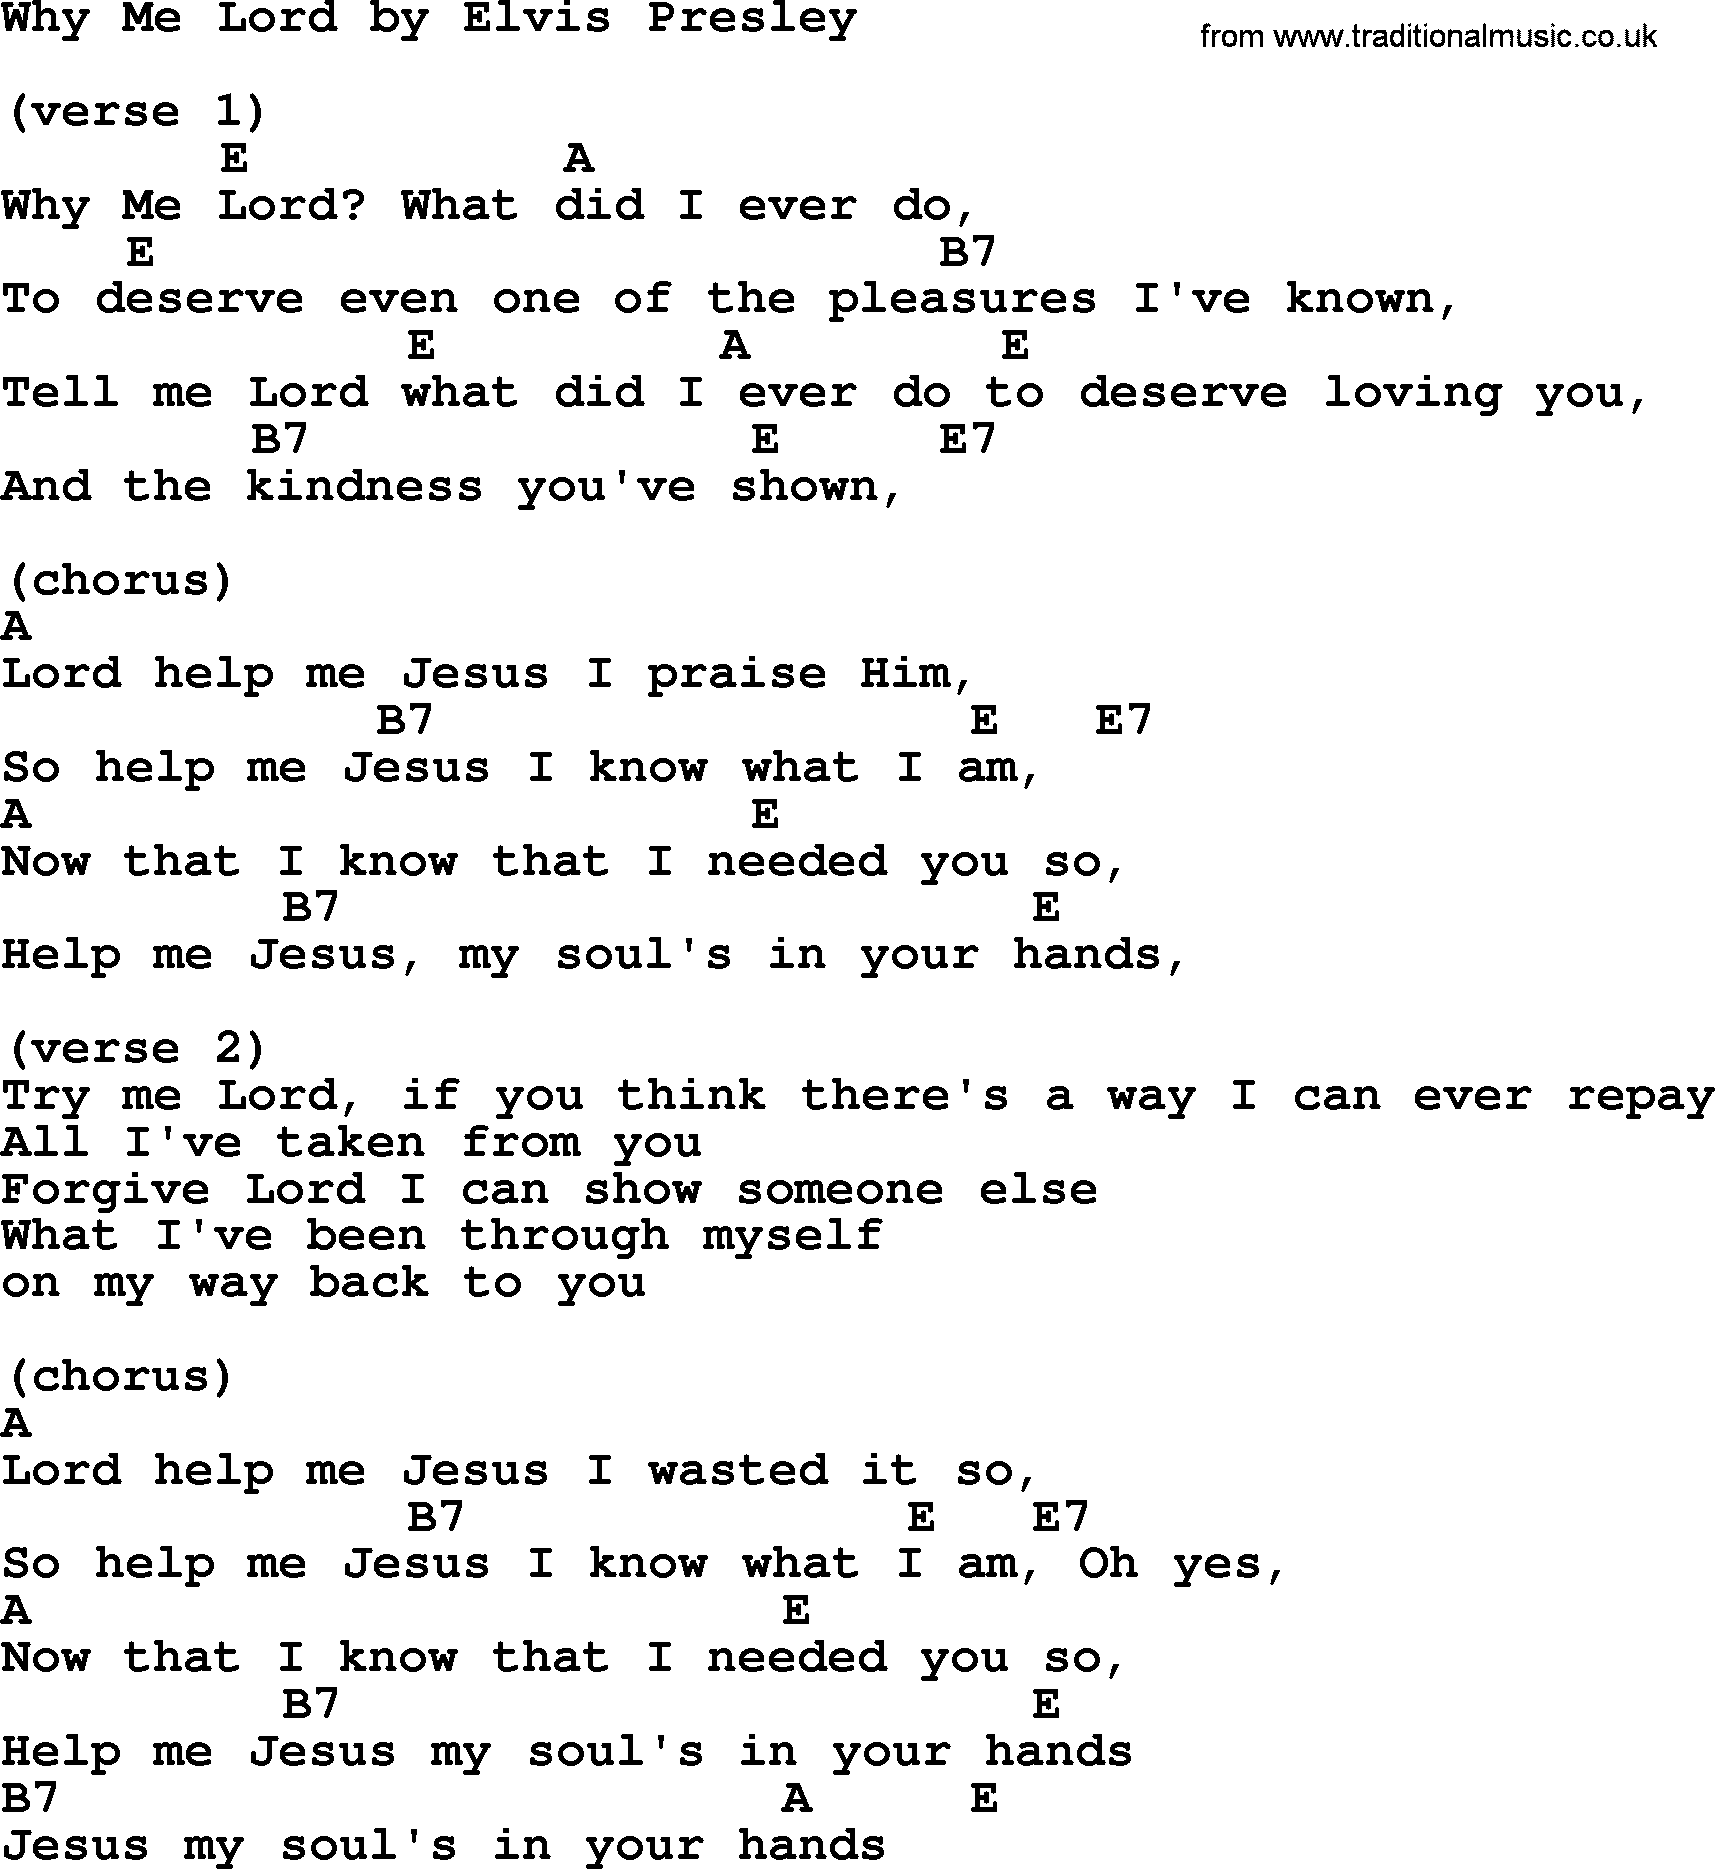 Elvis Presley song: Why Me Lord, lyrics and chords